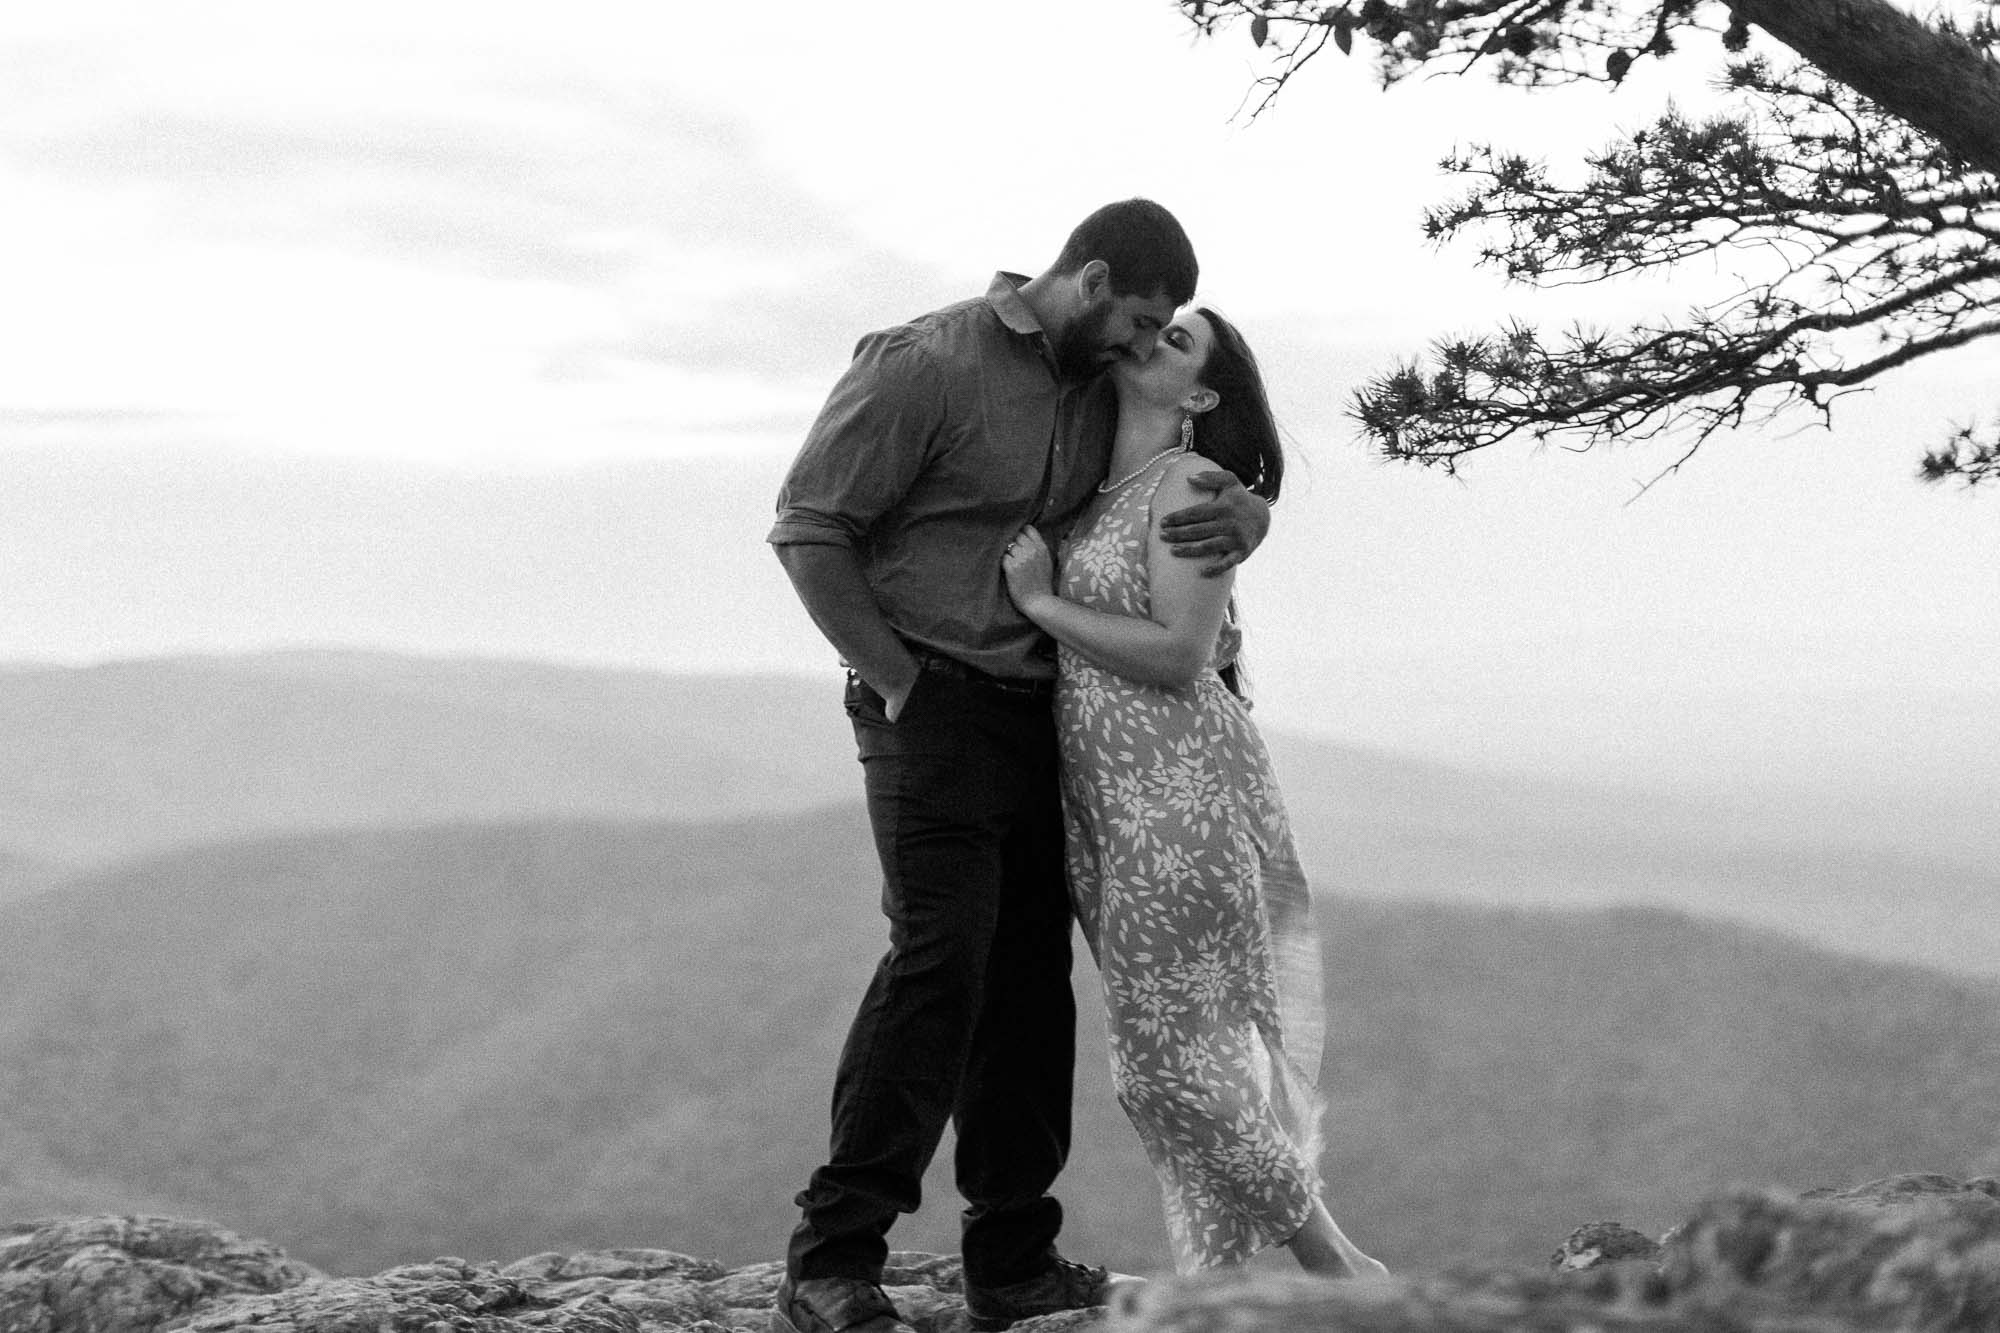 charlottesville-engagement-session-ravens-roost-overlook-outdoor-engagement-session-virginia-blue-ridge-kissing-black-and-white.jpg